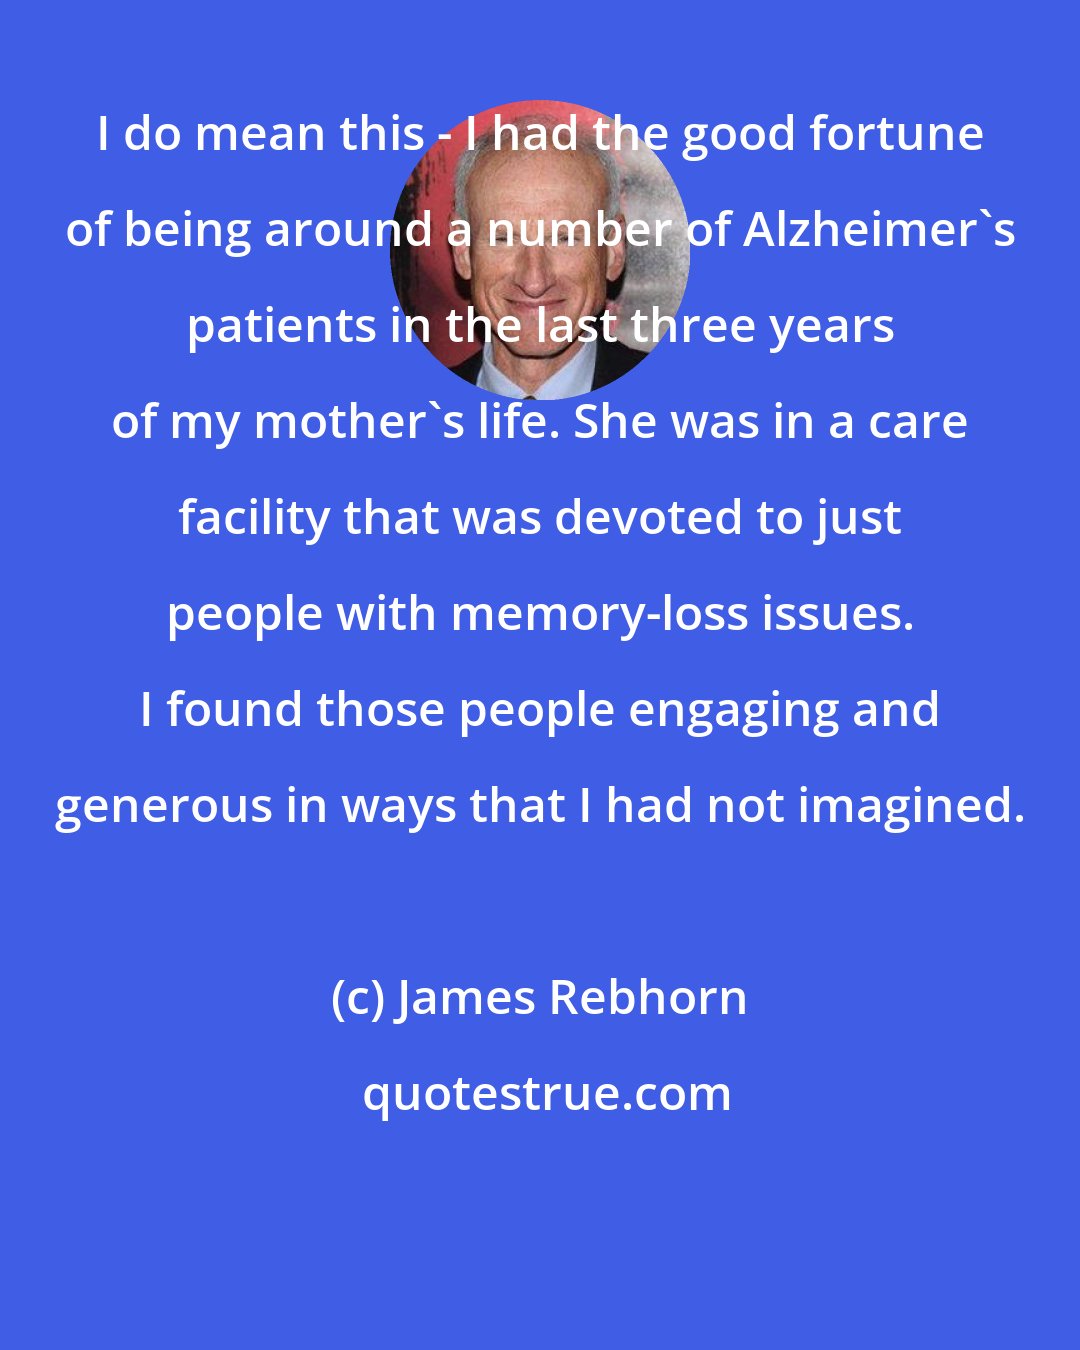 James Rebhorn: I do mean this - I had the good fortune of being around a number of Alzheimer's patients in the last three years of my mother's life. She was in a care facility that was devoted to just people with memory-loss issues. I found those people engaging and generous in ways that I had not imagined.